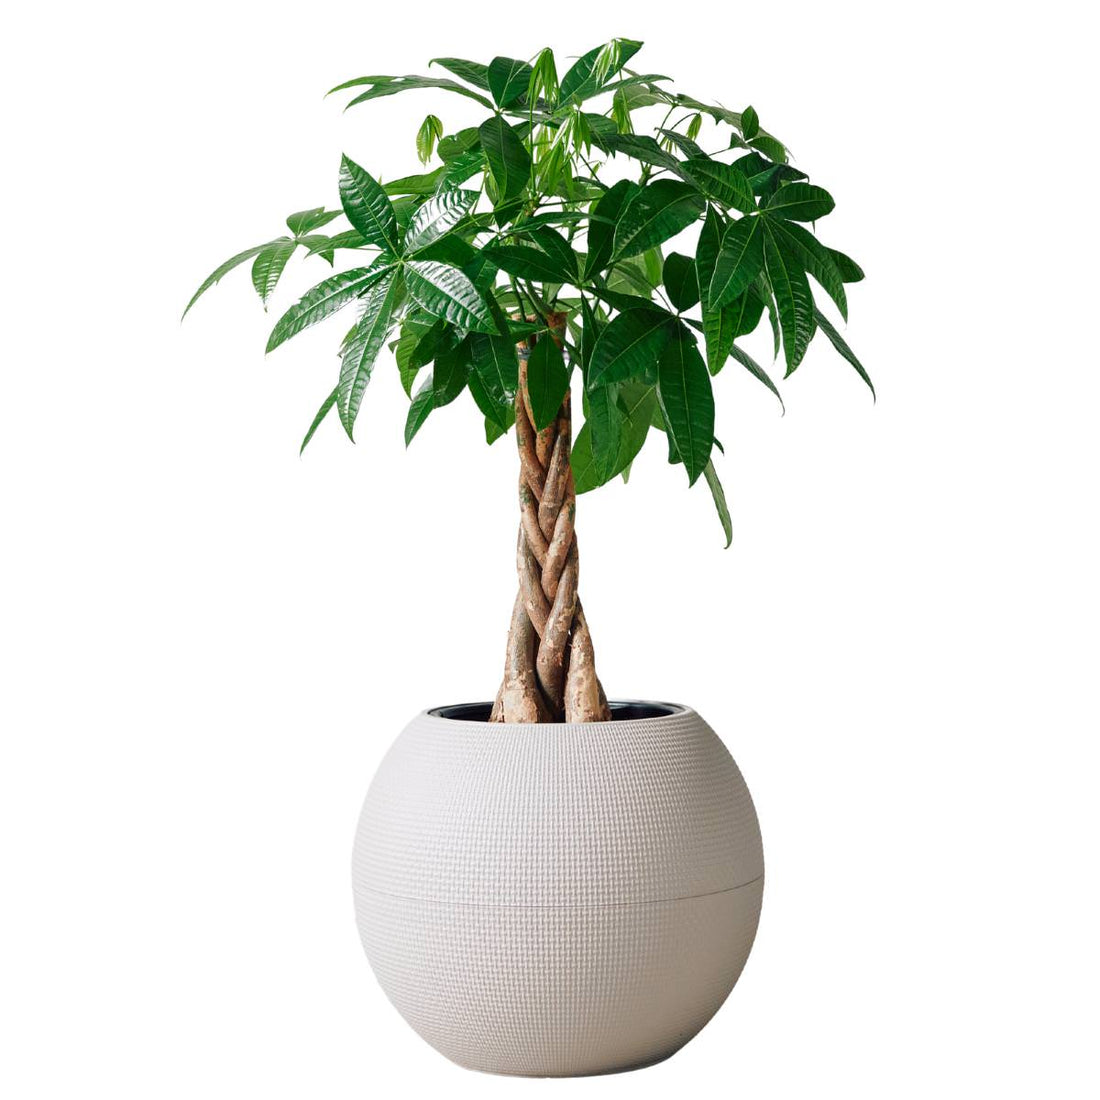 Money Tree Potted In Lechuza Puro Planter - Sand Brown - My City Plants